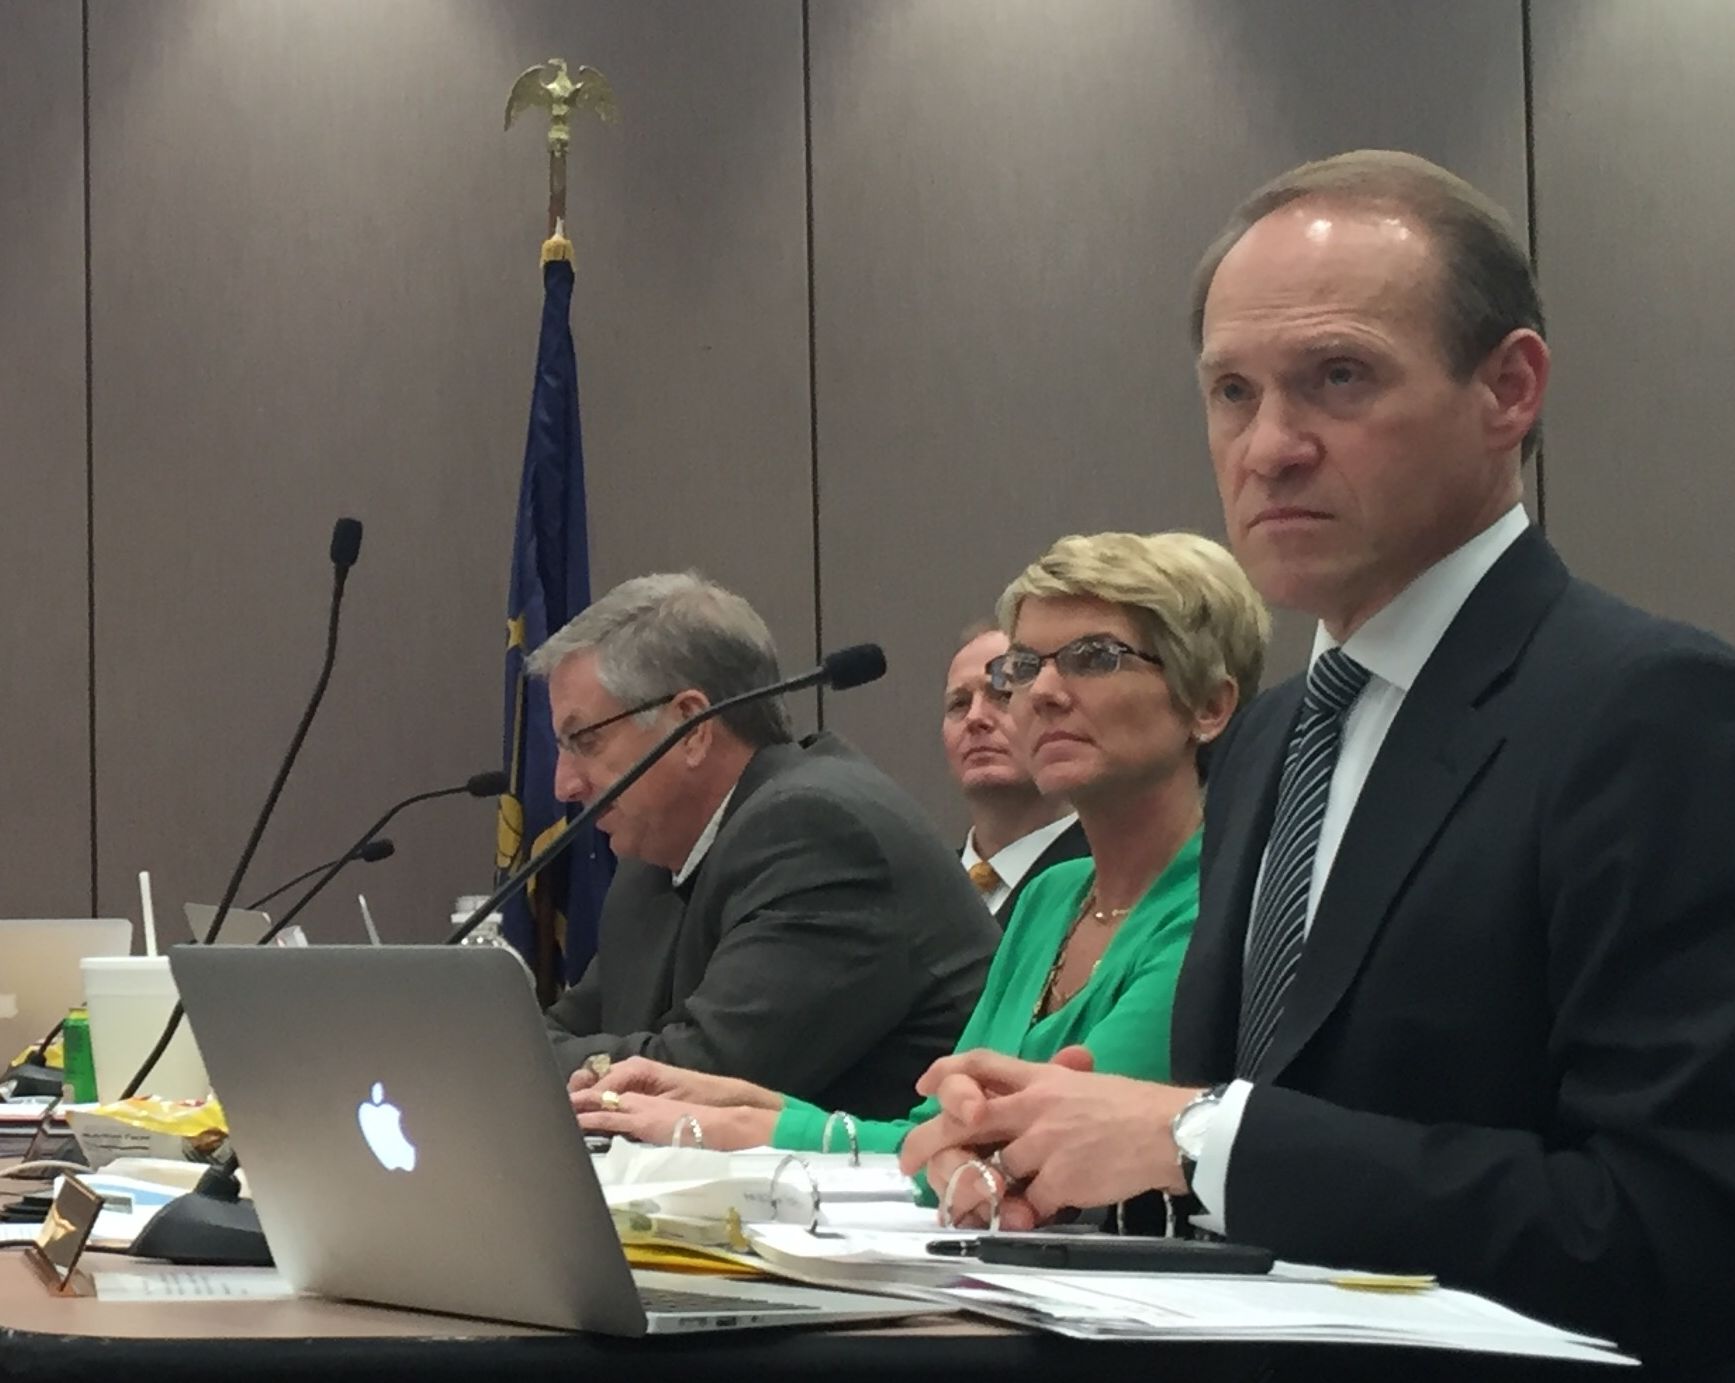 The Indiana State Board of Education approved the voucher waiver requests at its June meeting.